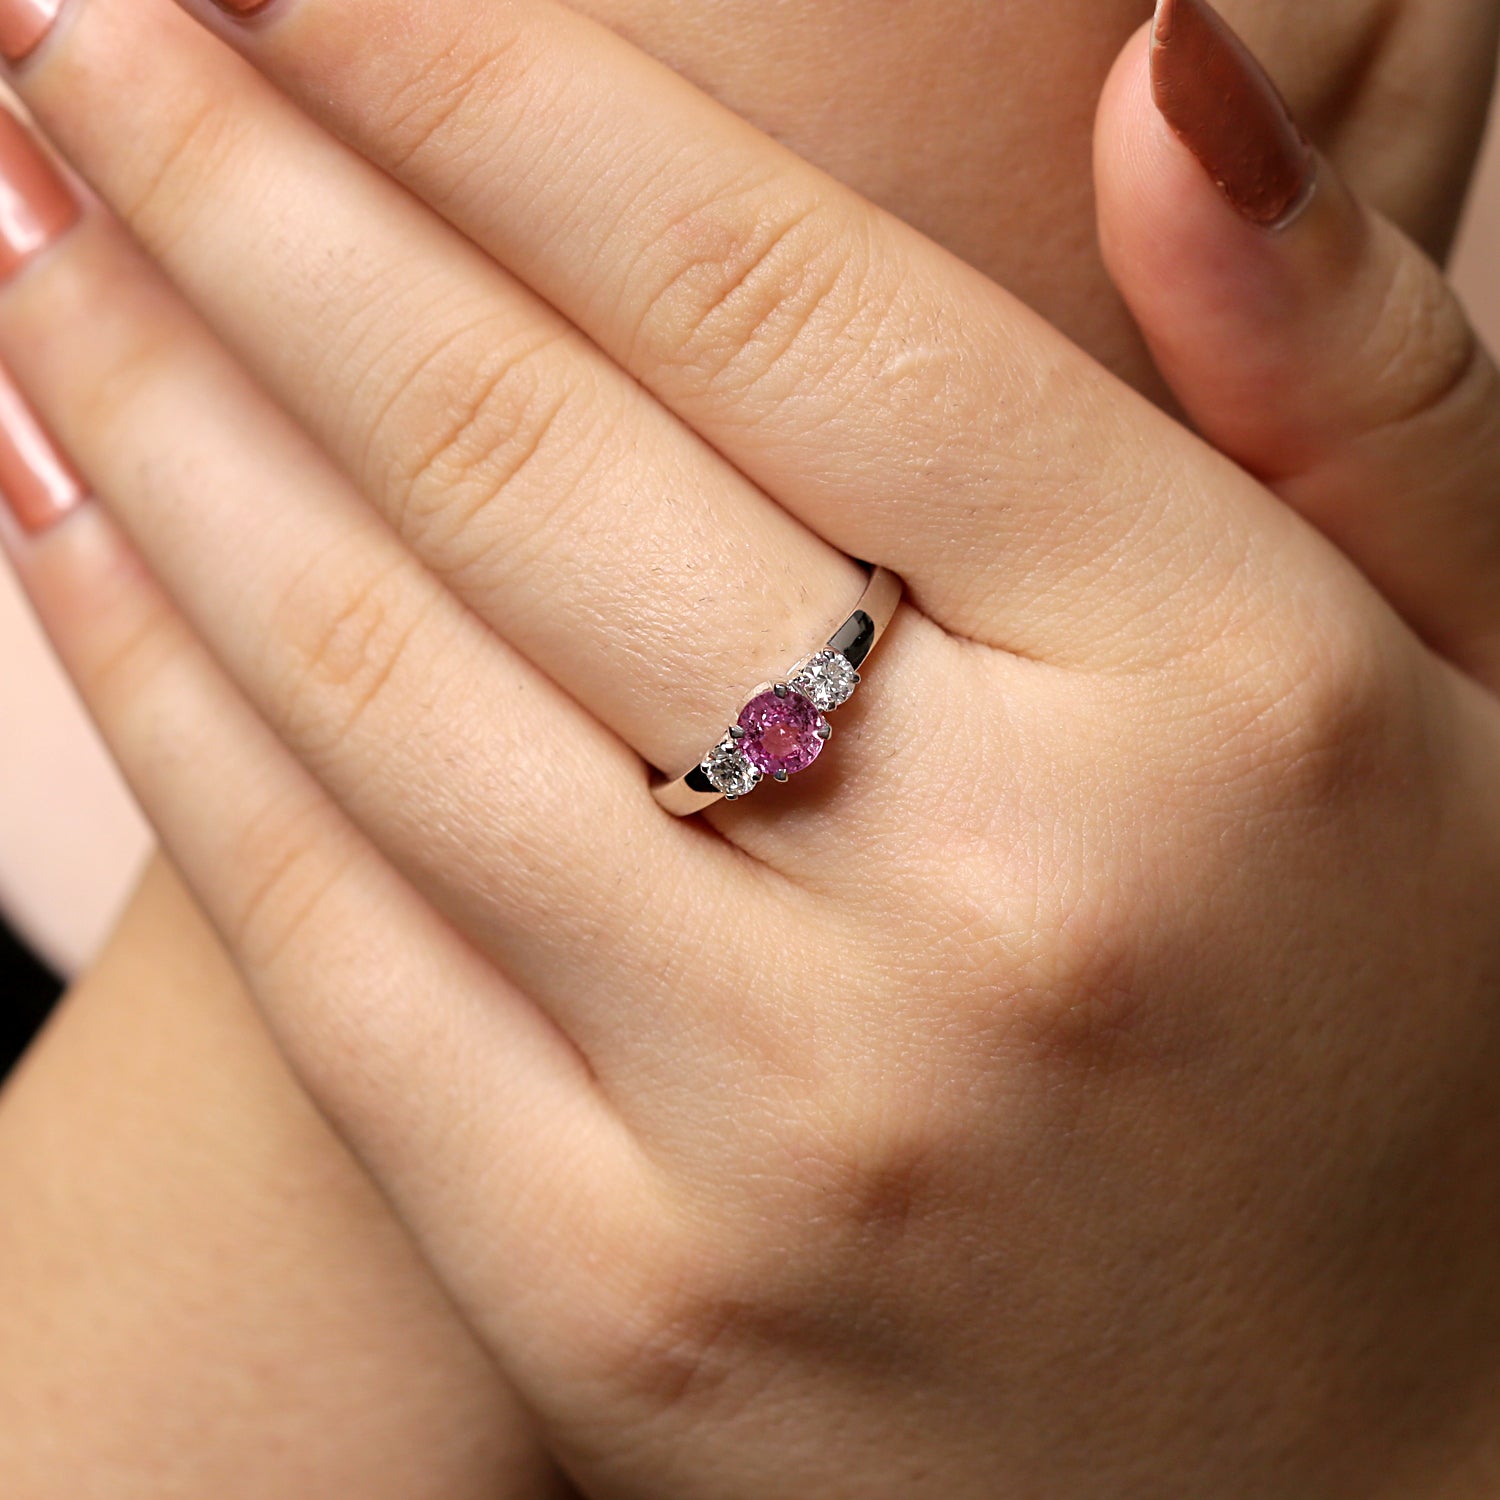 18K gold Pink Sapphire Ring